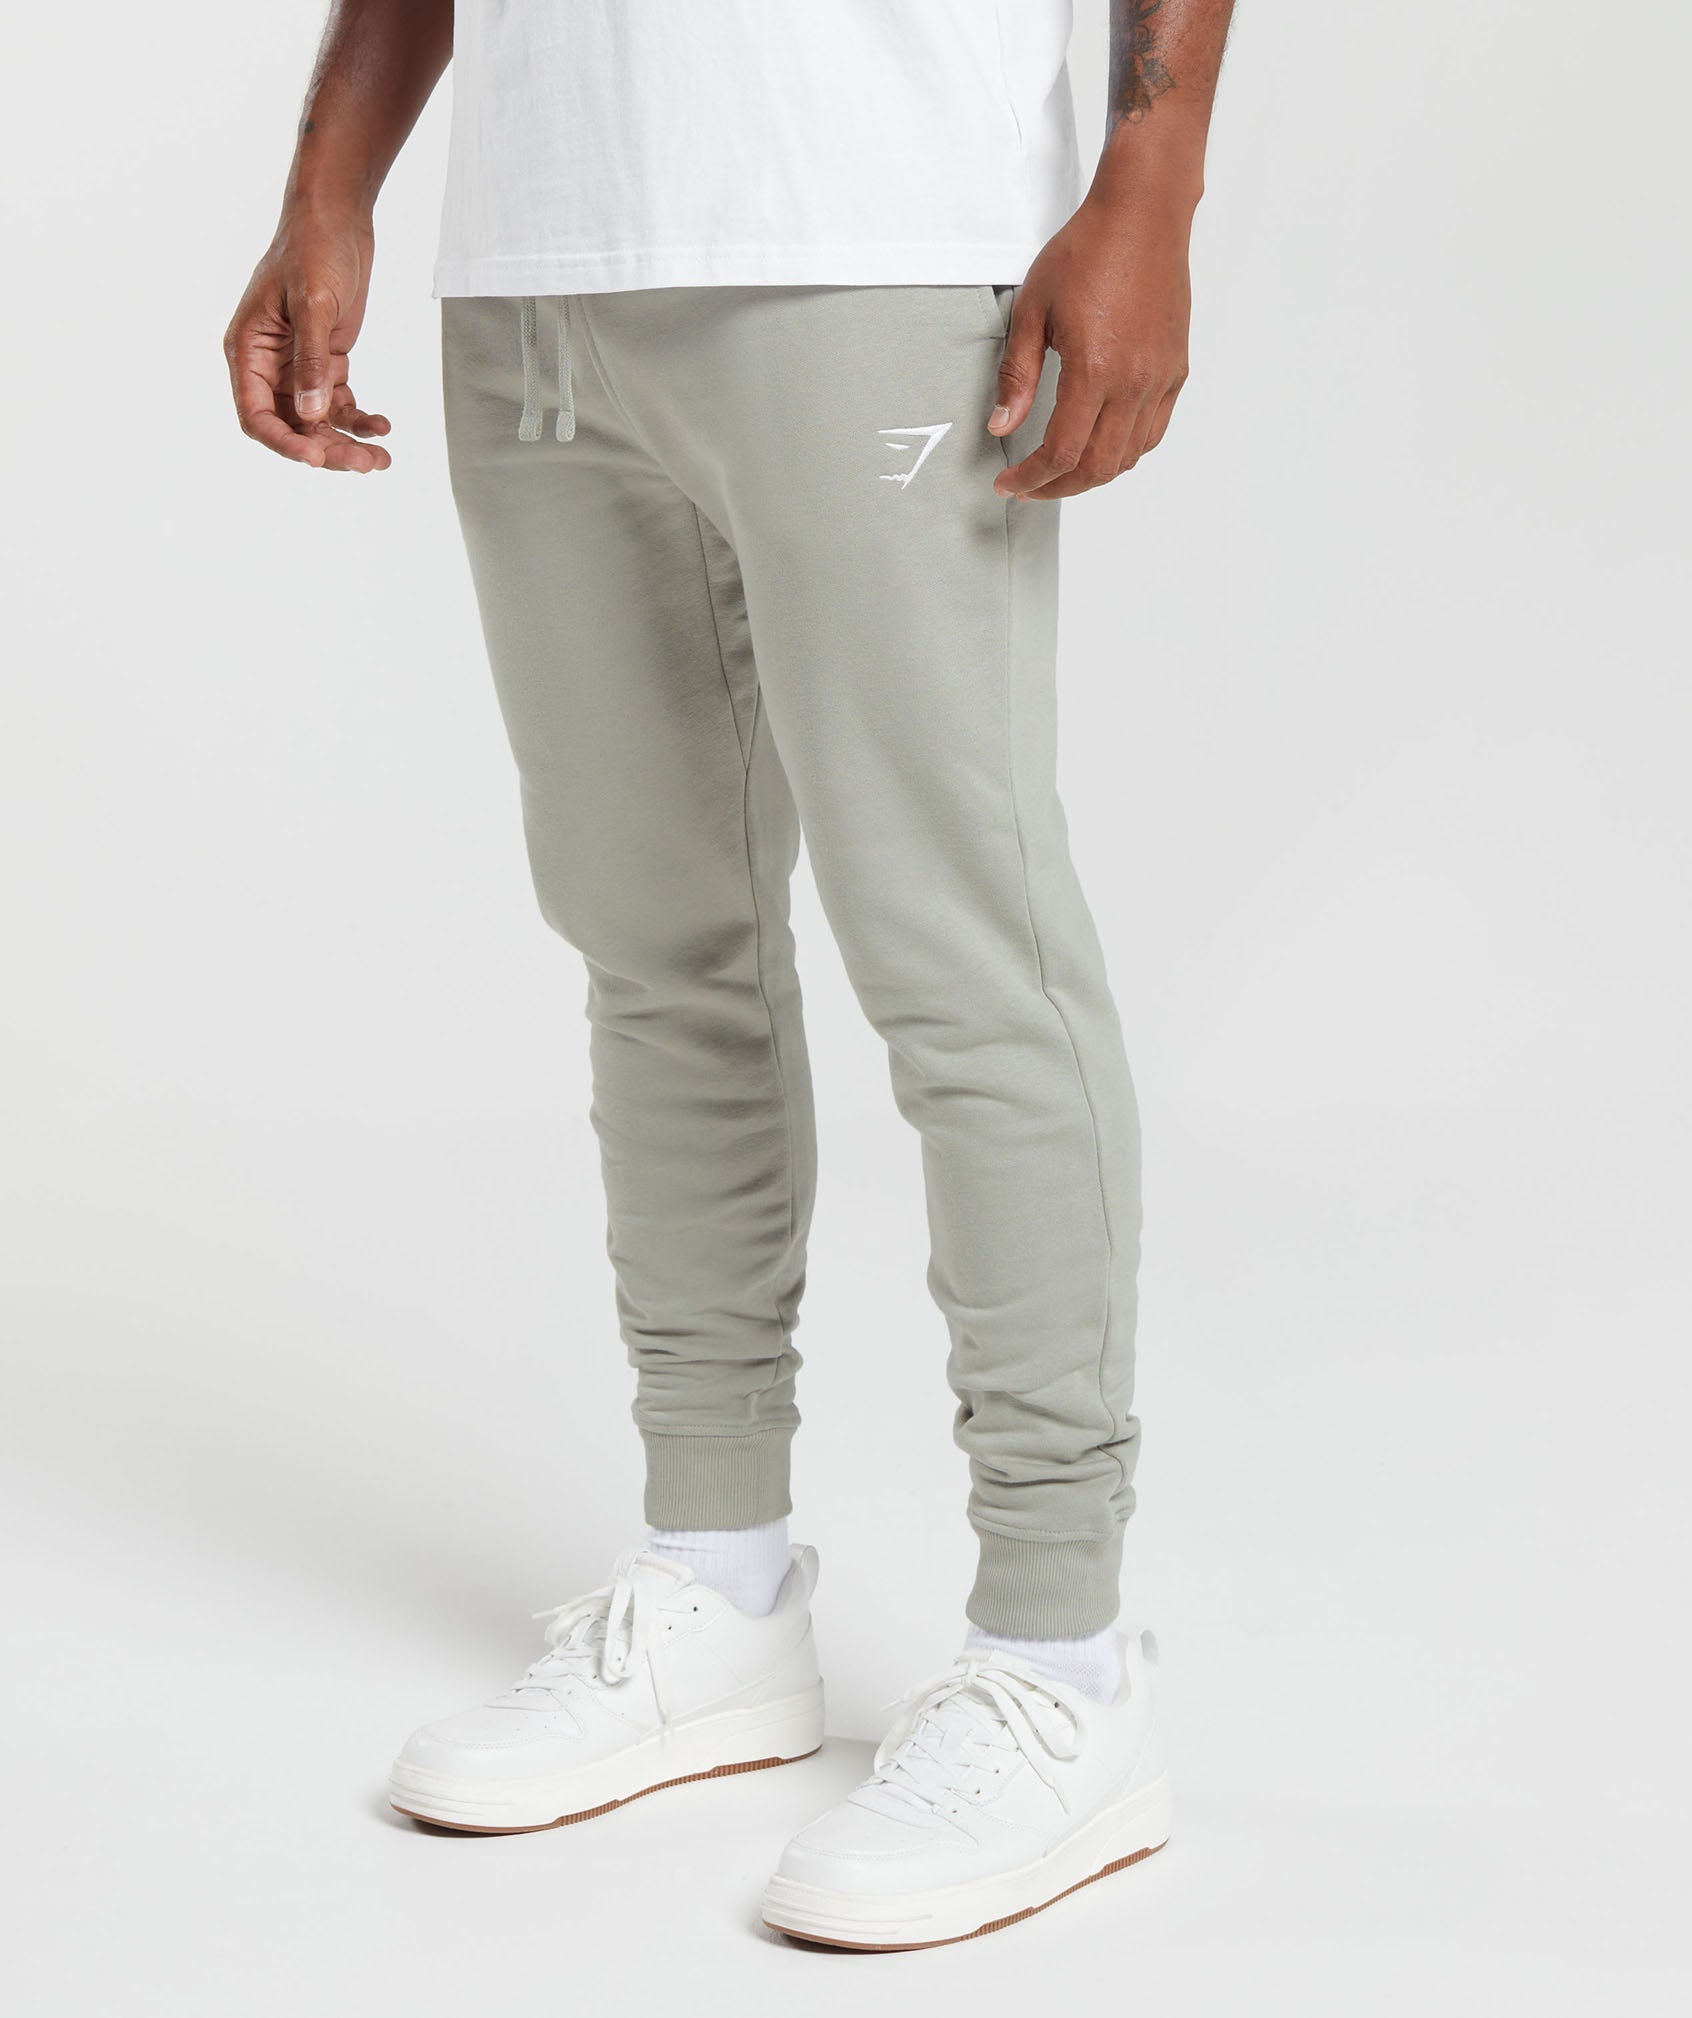 Crest Joggers in Stone Grey - view 3